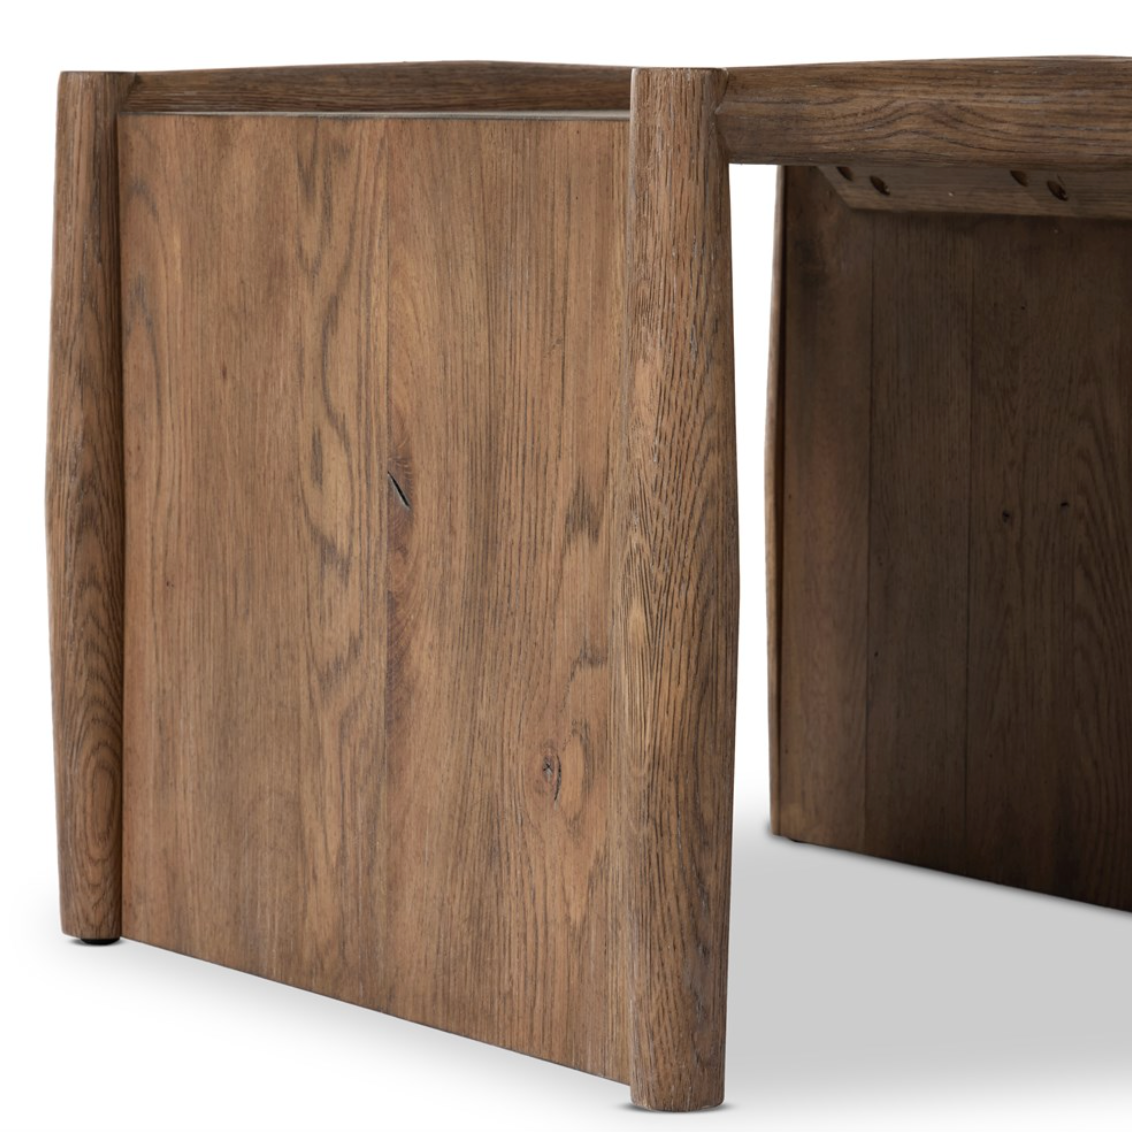 Glenview Weathered Oak End Table